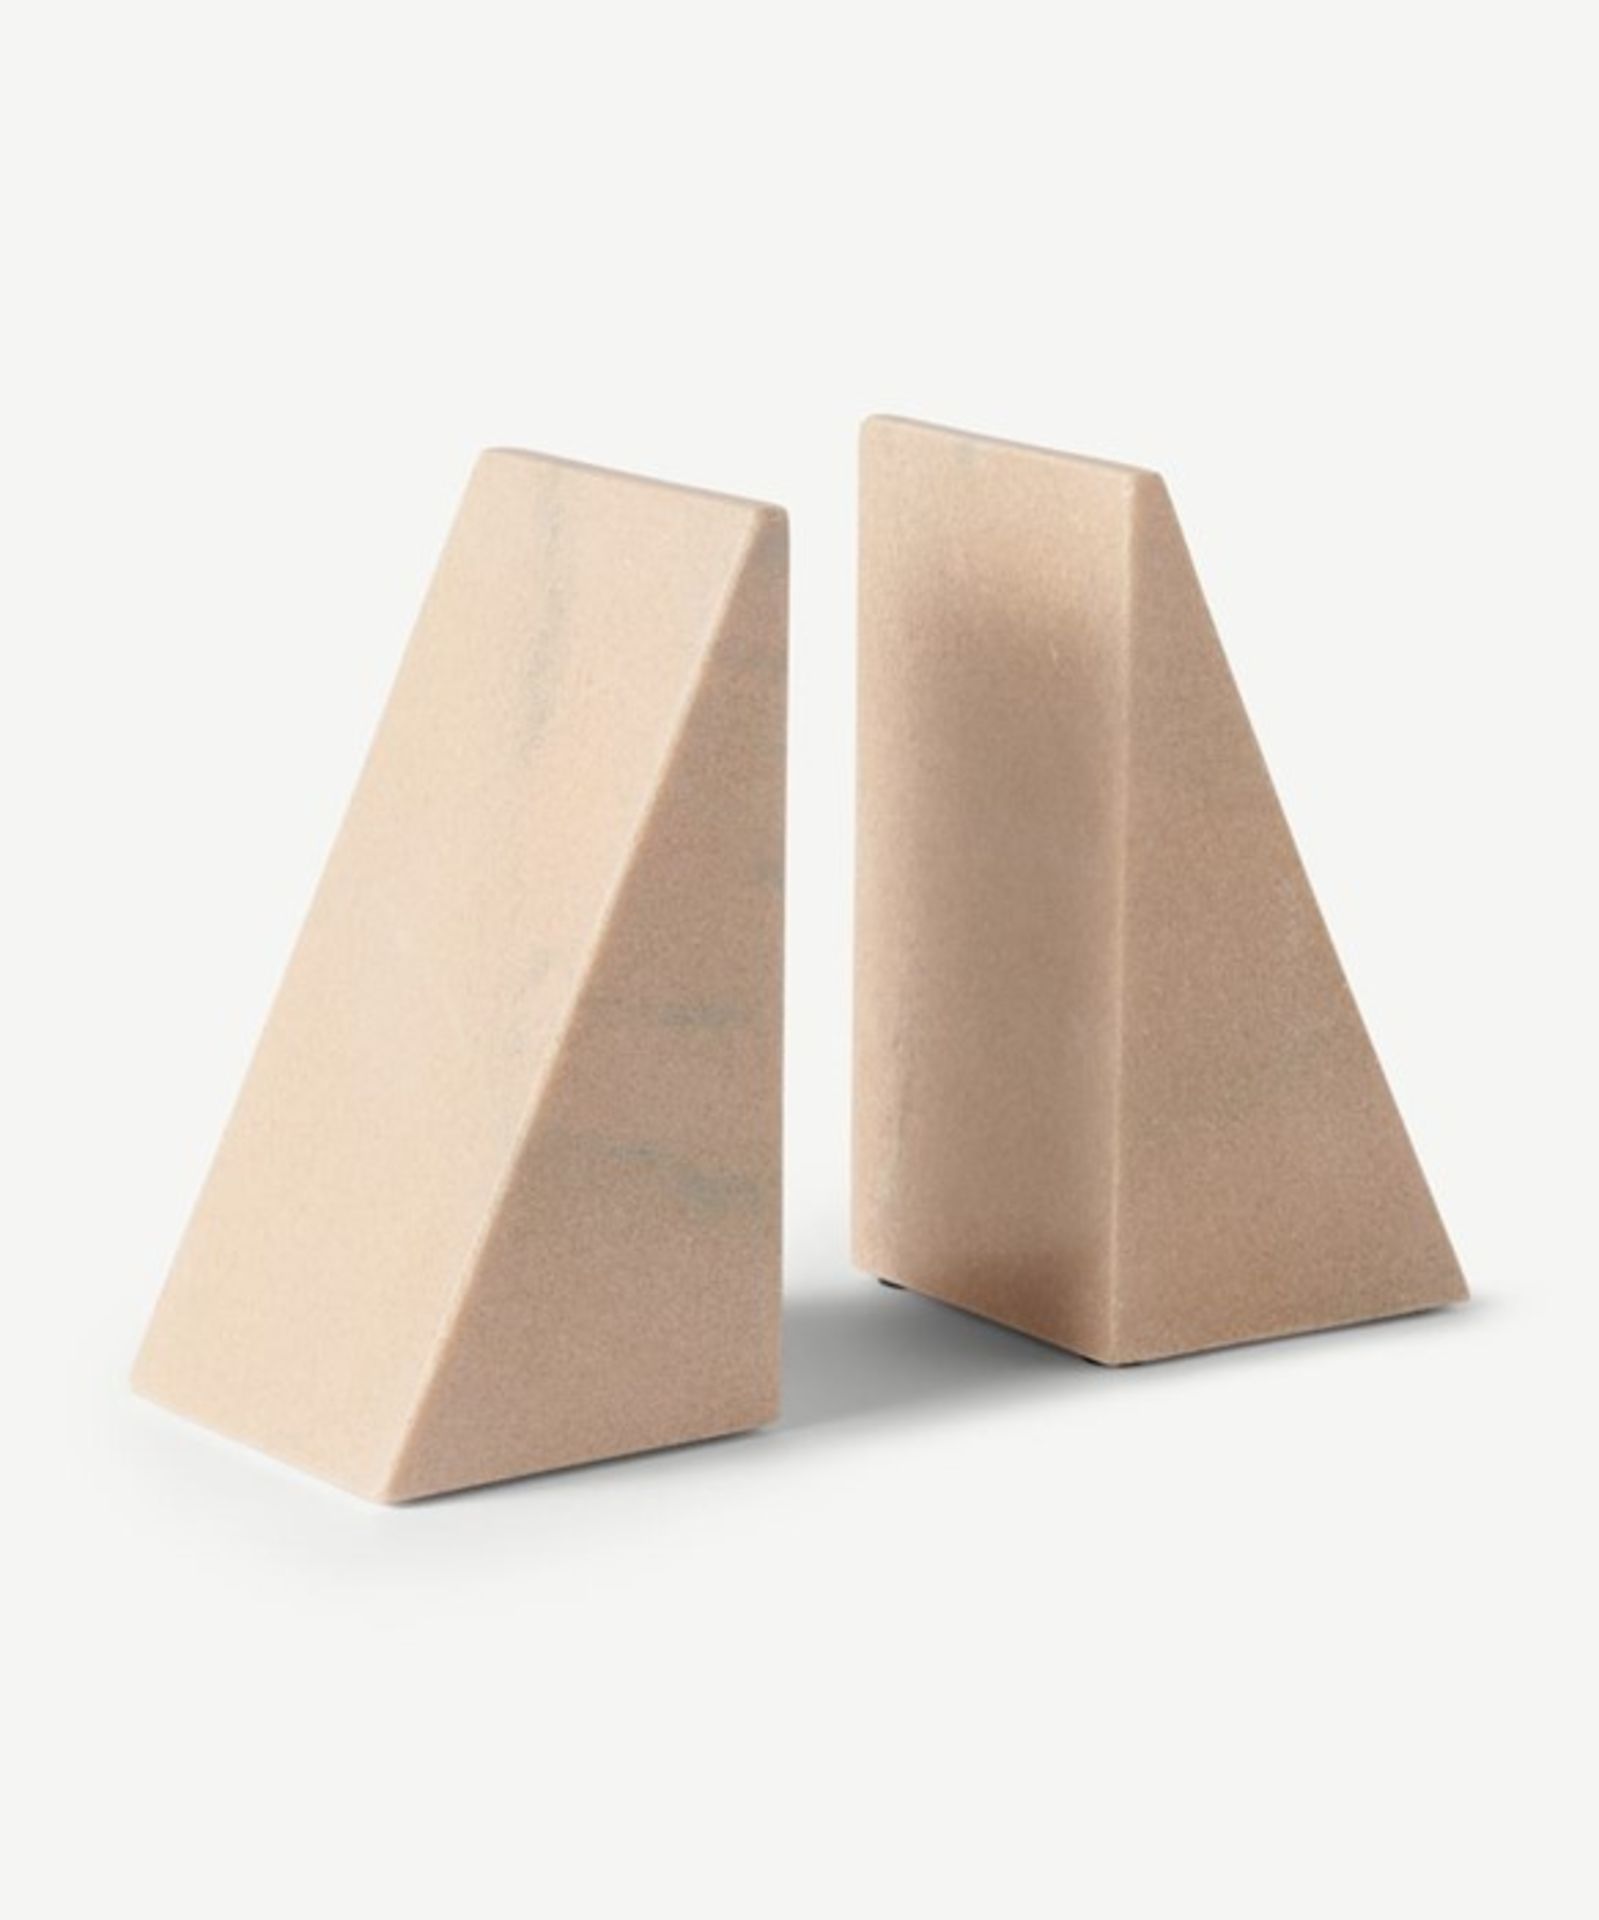 | 1x | Made.com Elisa Set of 2 Marble Book Ends Pink RRP Â£25 | SKU MAD-DACELS004PIN-UK | RAW |